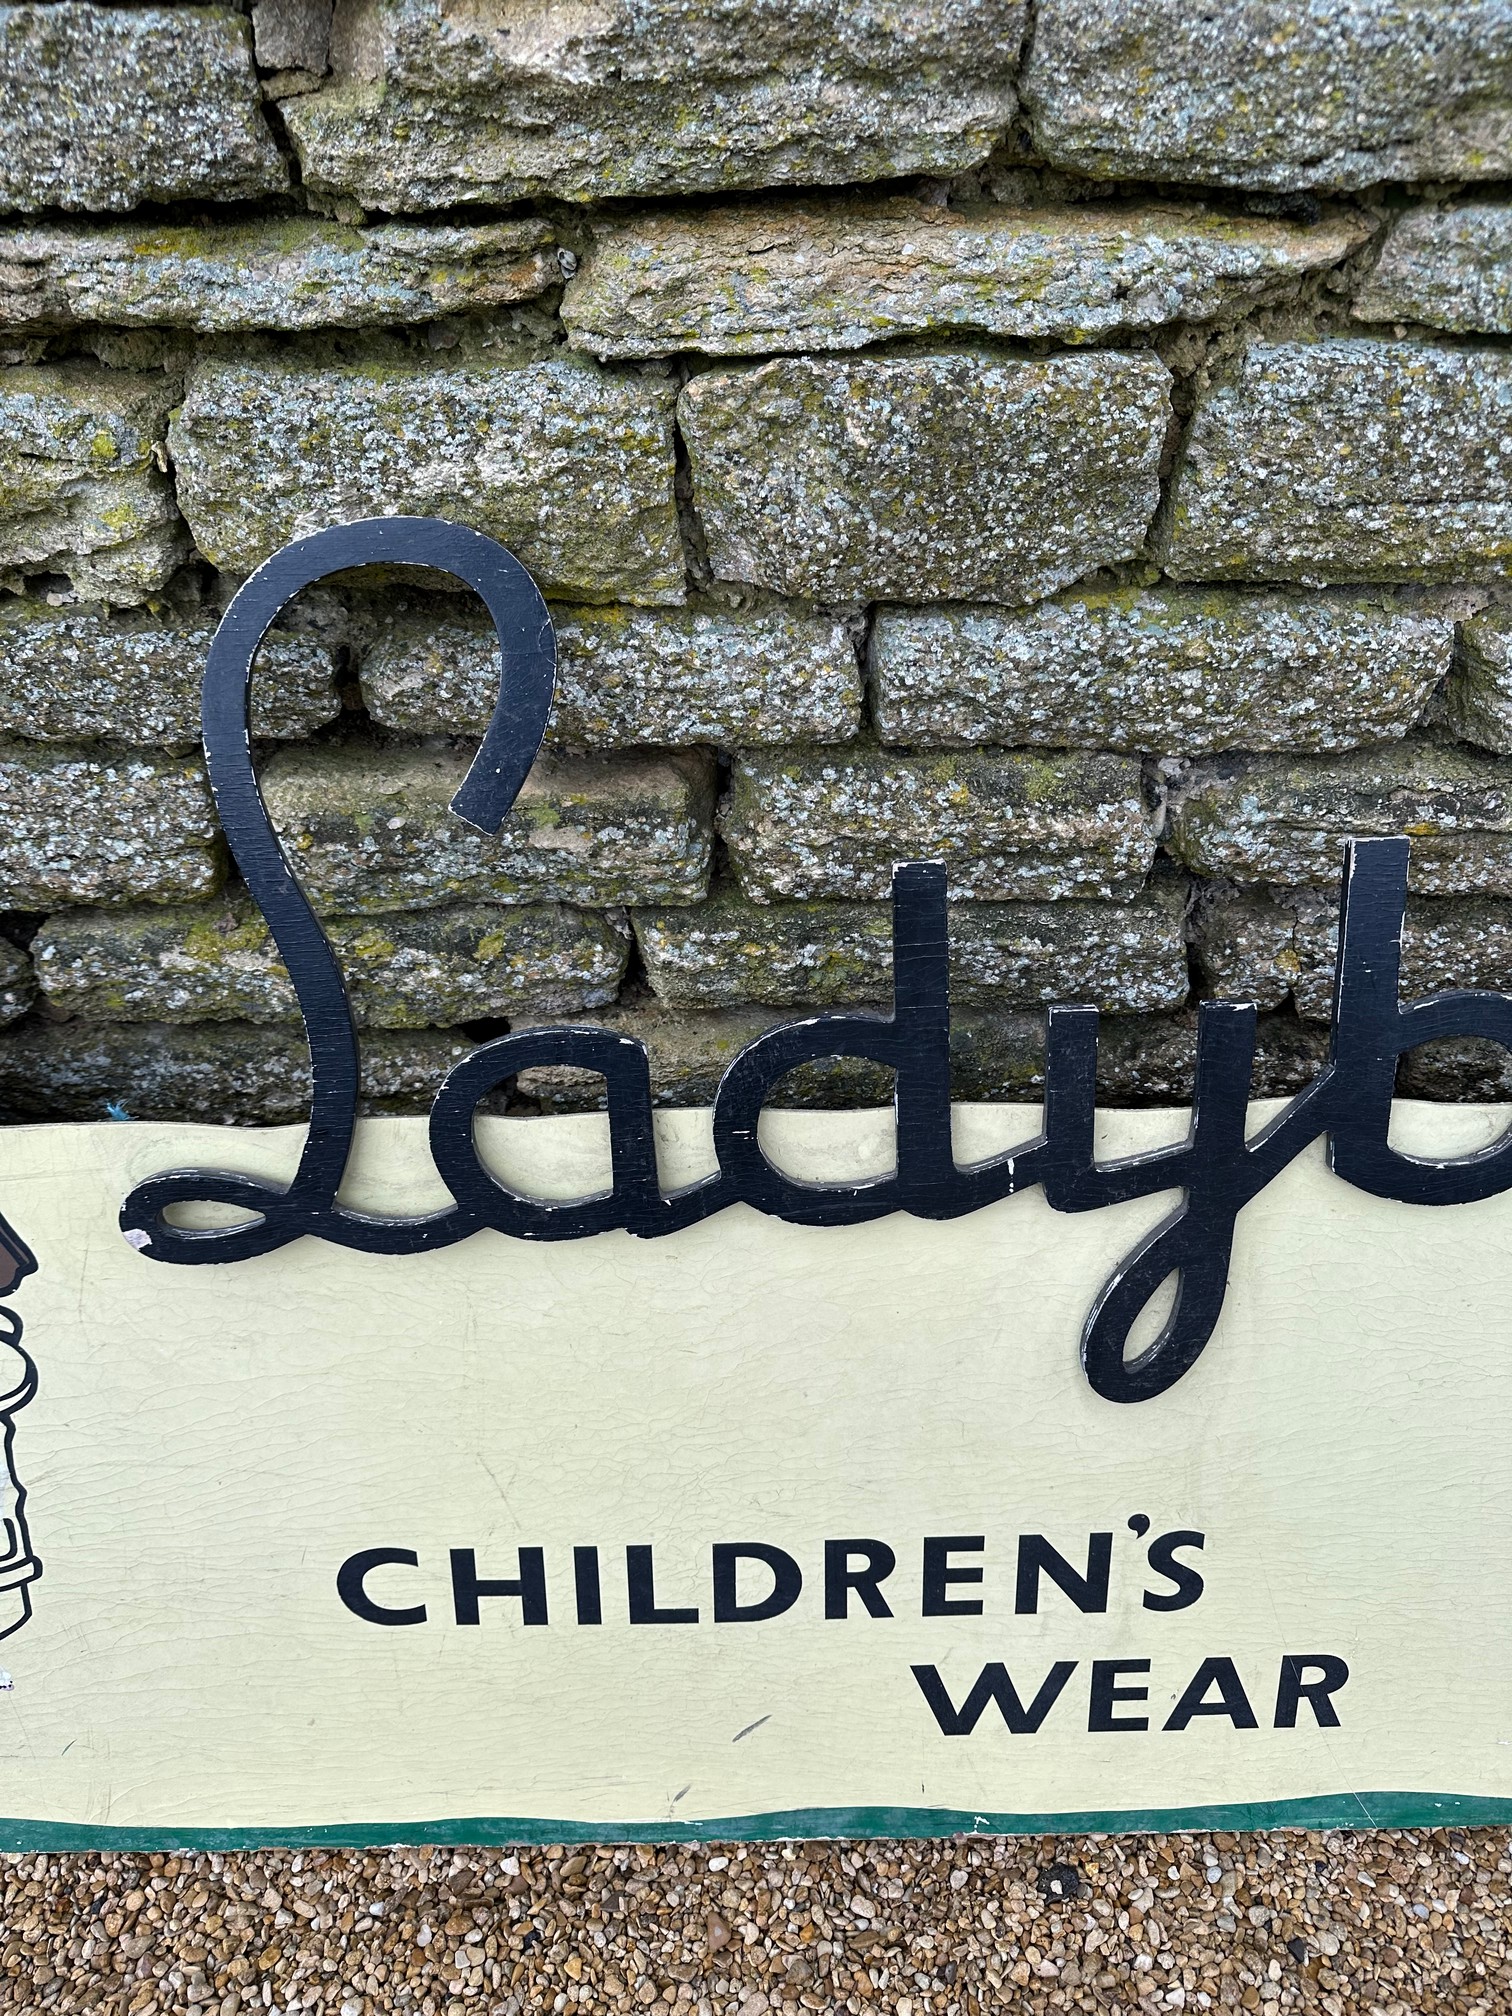 A 1950s Ladybird Childrenswear boarded hanging advertising sign, 72 x 36" - Image 4 of 5